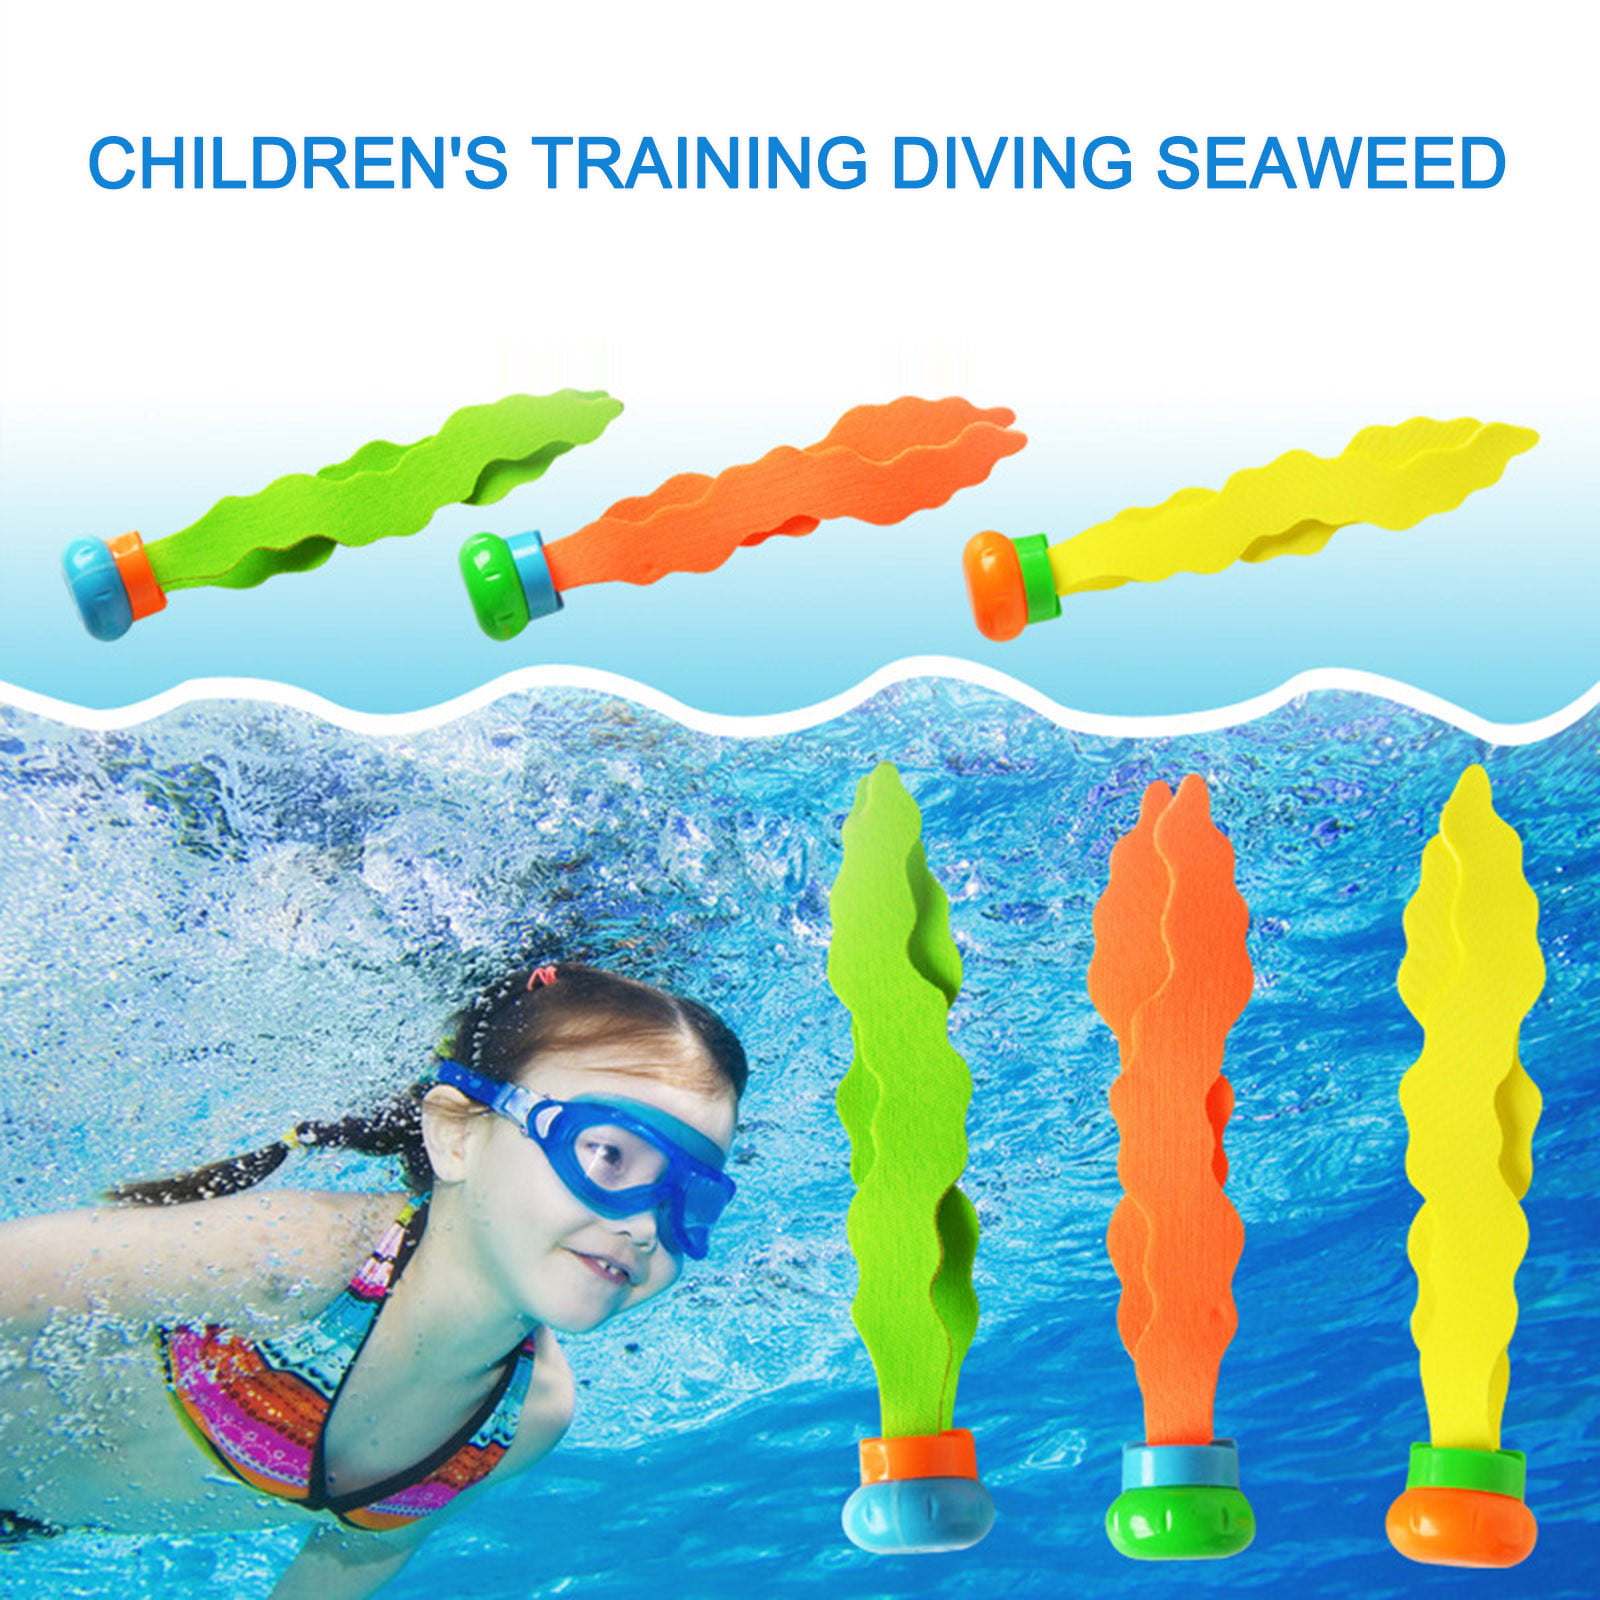 MINI DIVE BOMBS DIVING UNDERWATER PRACTICE SWIMMING FUN COMPETITION PARTY TOY 